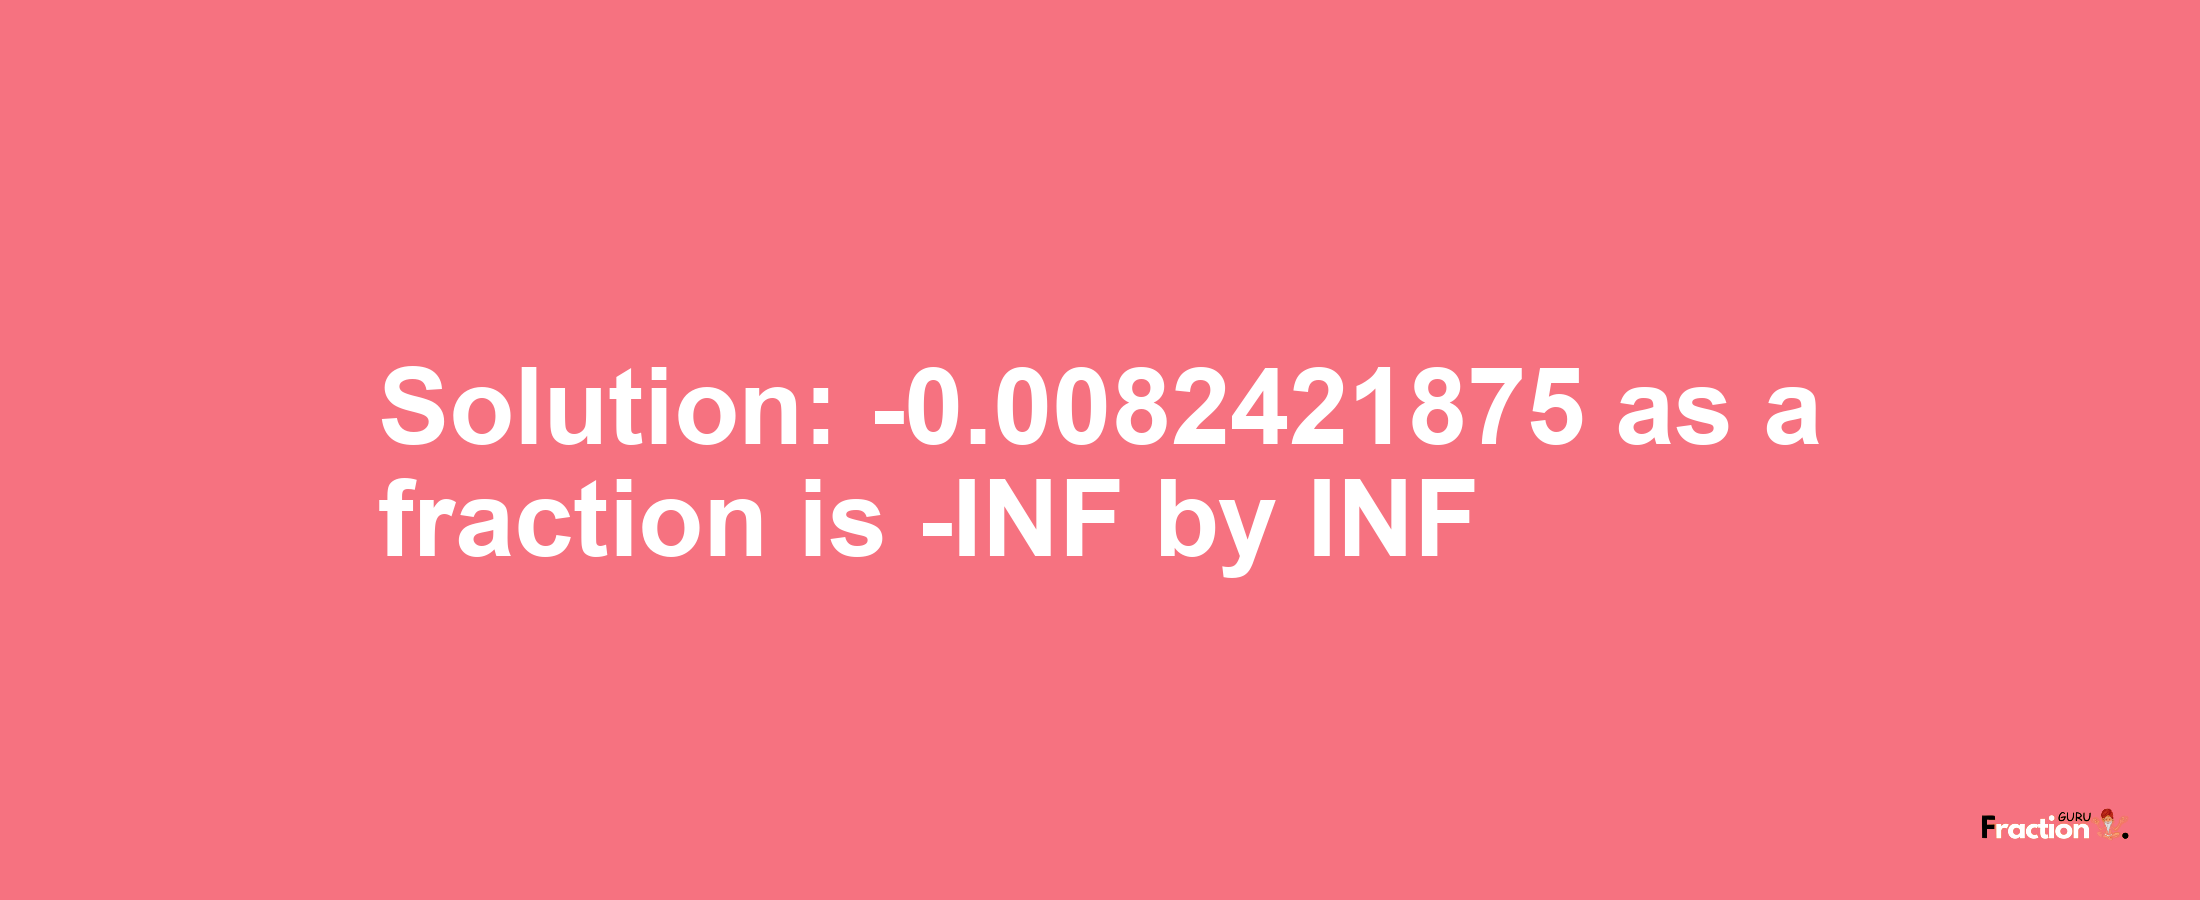 Solution:-0.0082421875 as a fraction is -INF/INF